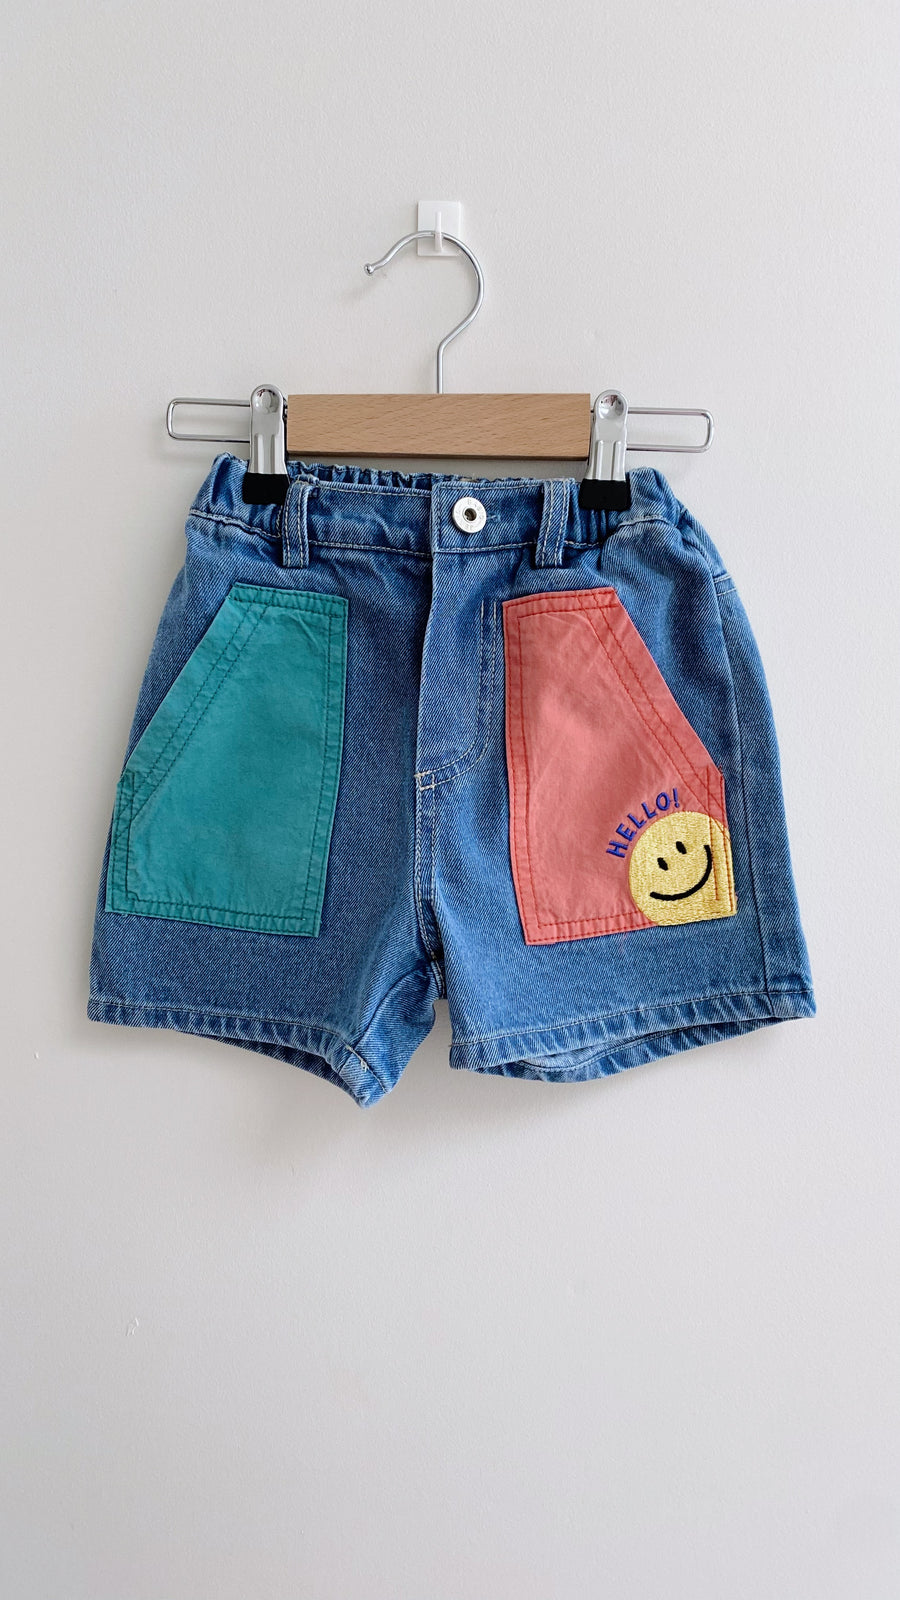 Smiley Jeans shorts